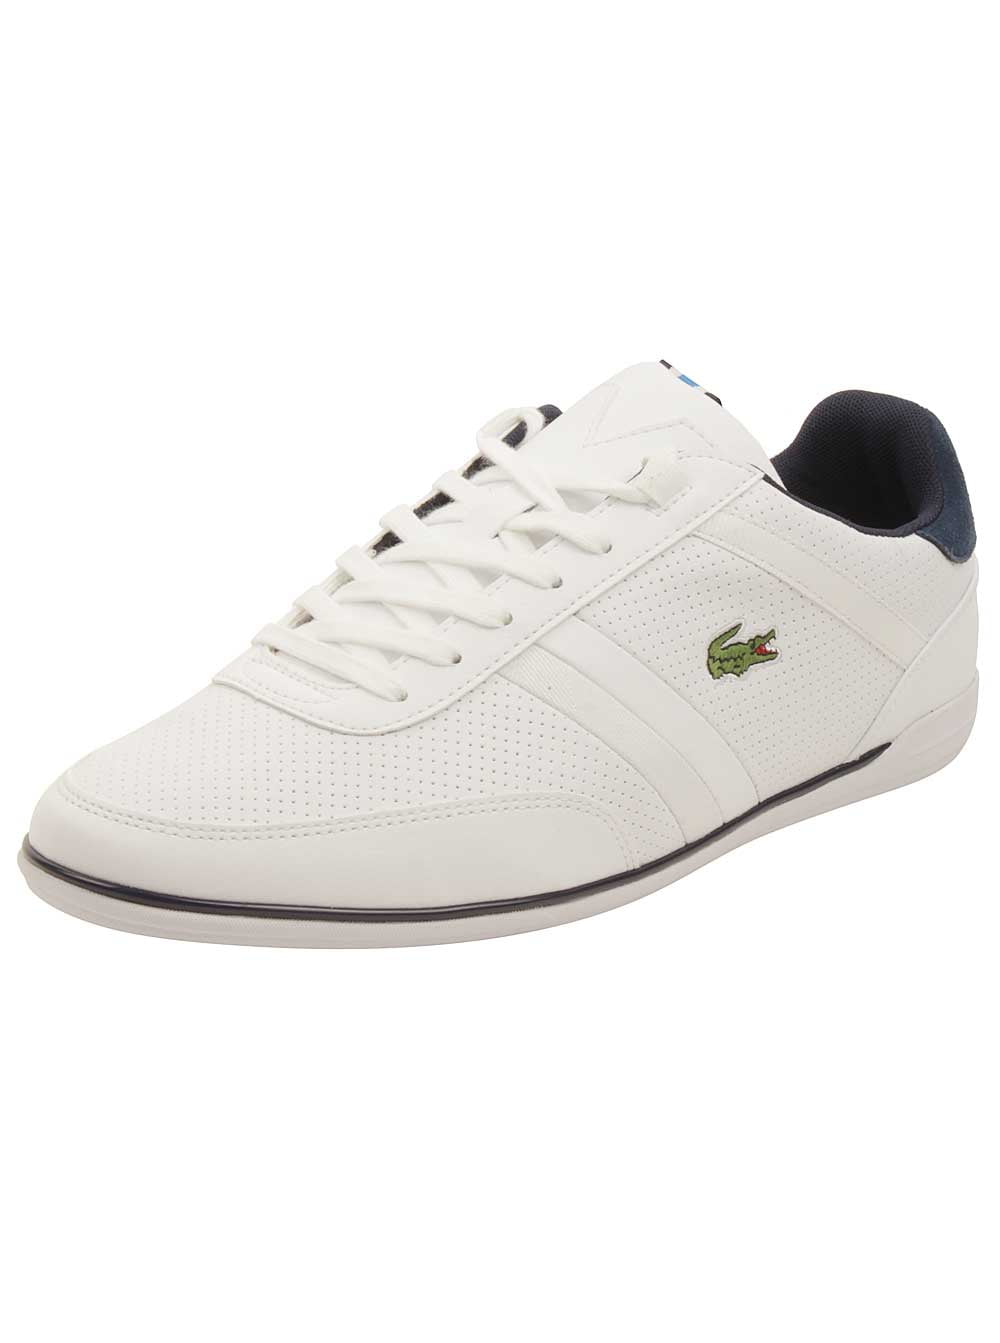 Lacoste Mens Giron SNM Sneakers in White - Walmart.com